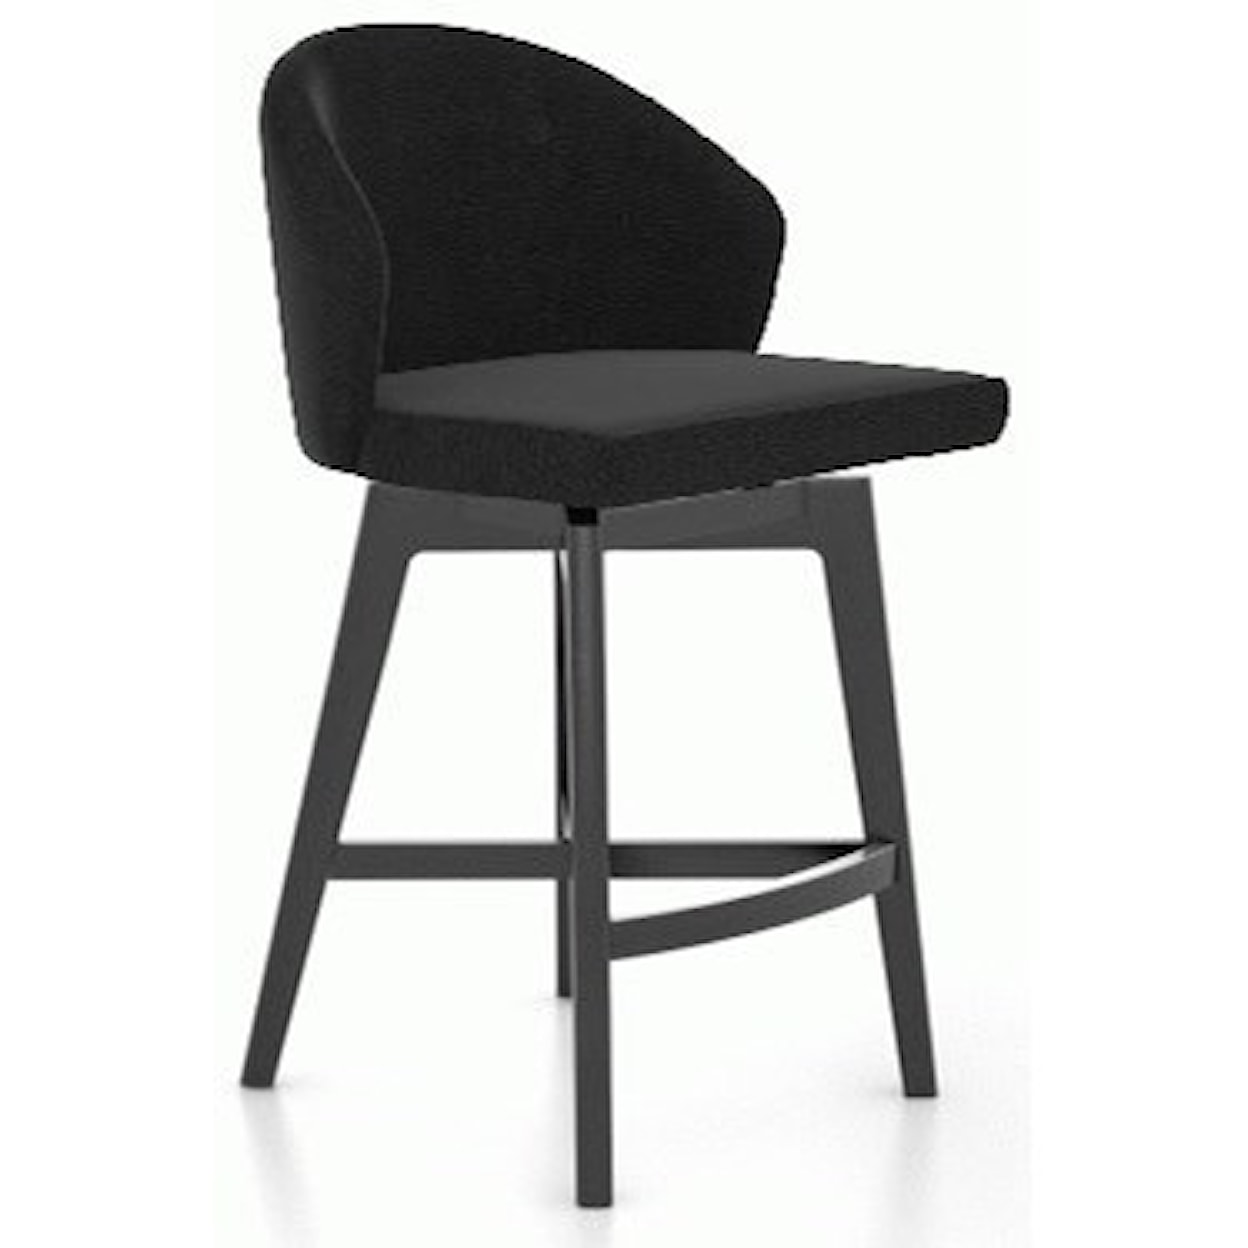 Canadel Downtown Upholstered Swivel Stool